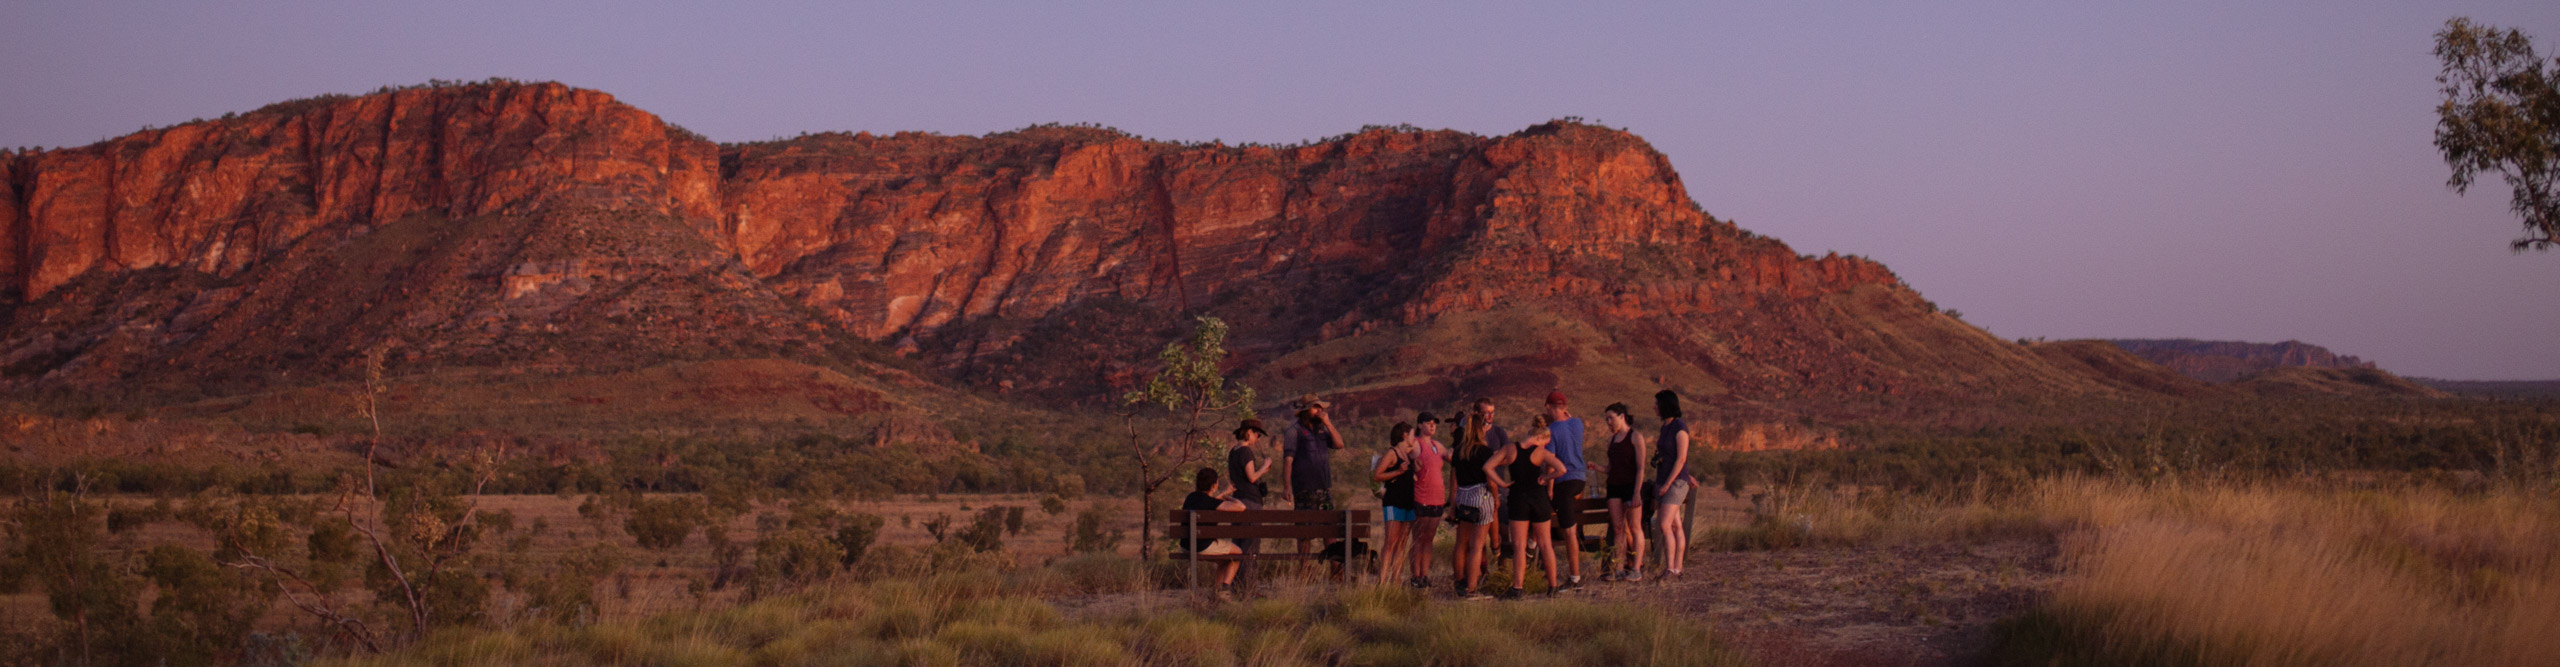 Group in the Kimberley's during at red sunset in Western Australia 